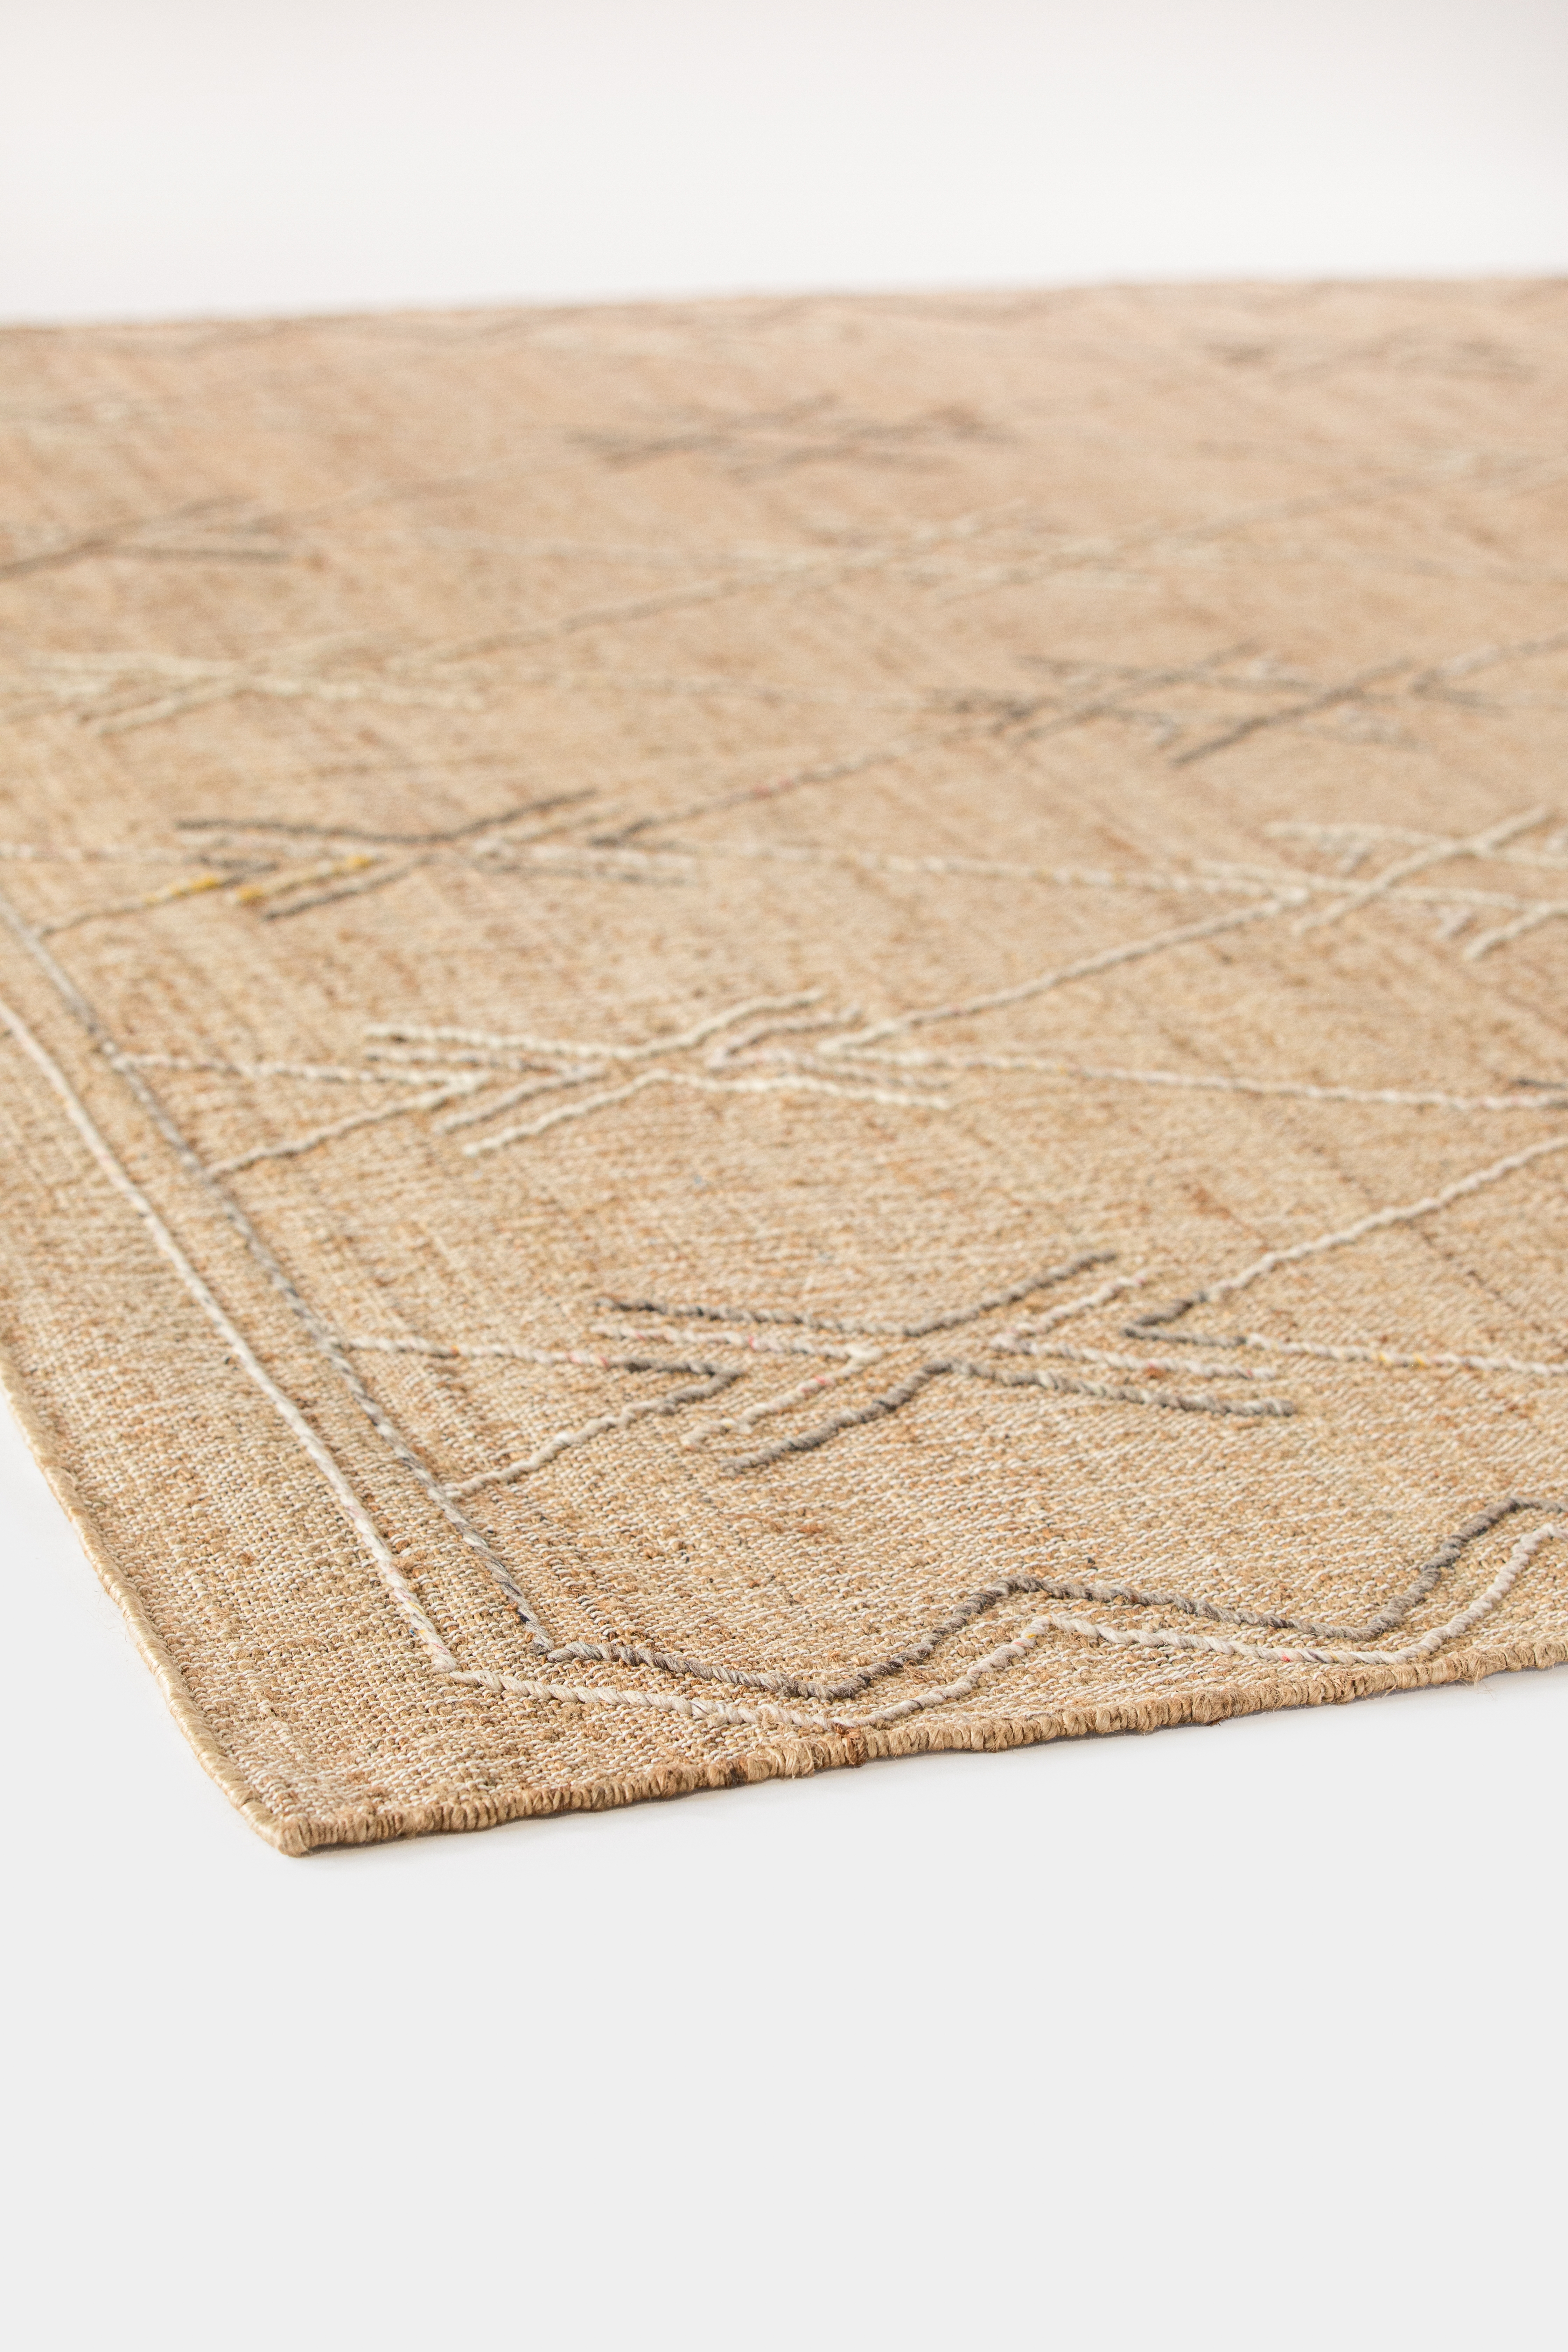 Discontinued - Capitola Rug, 4' x 6' - Image 1